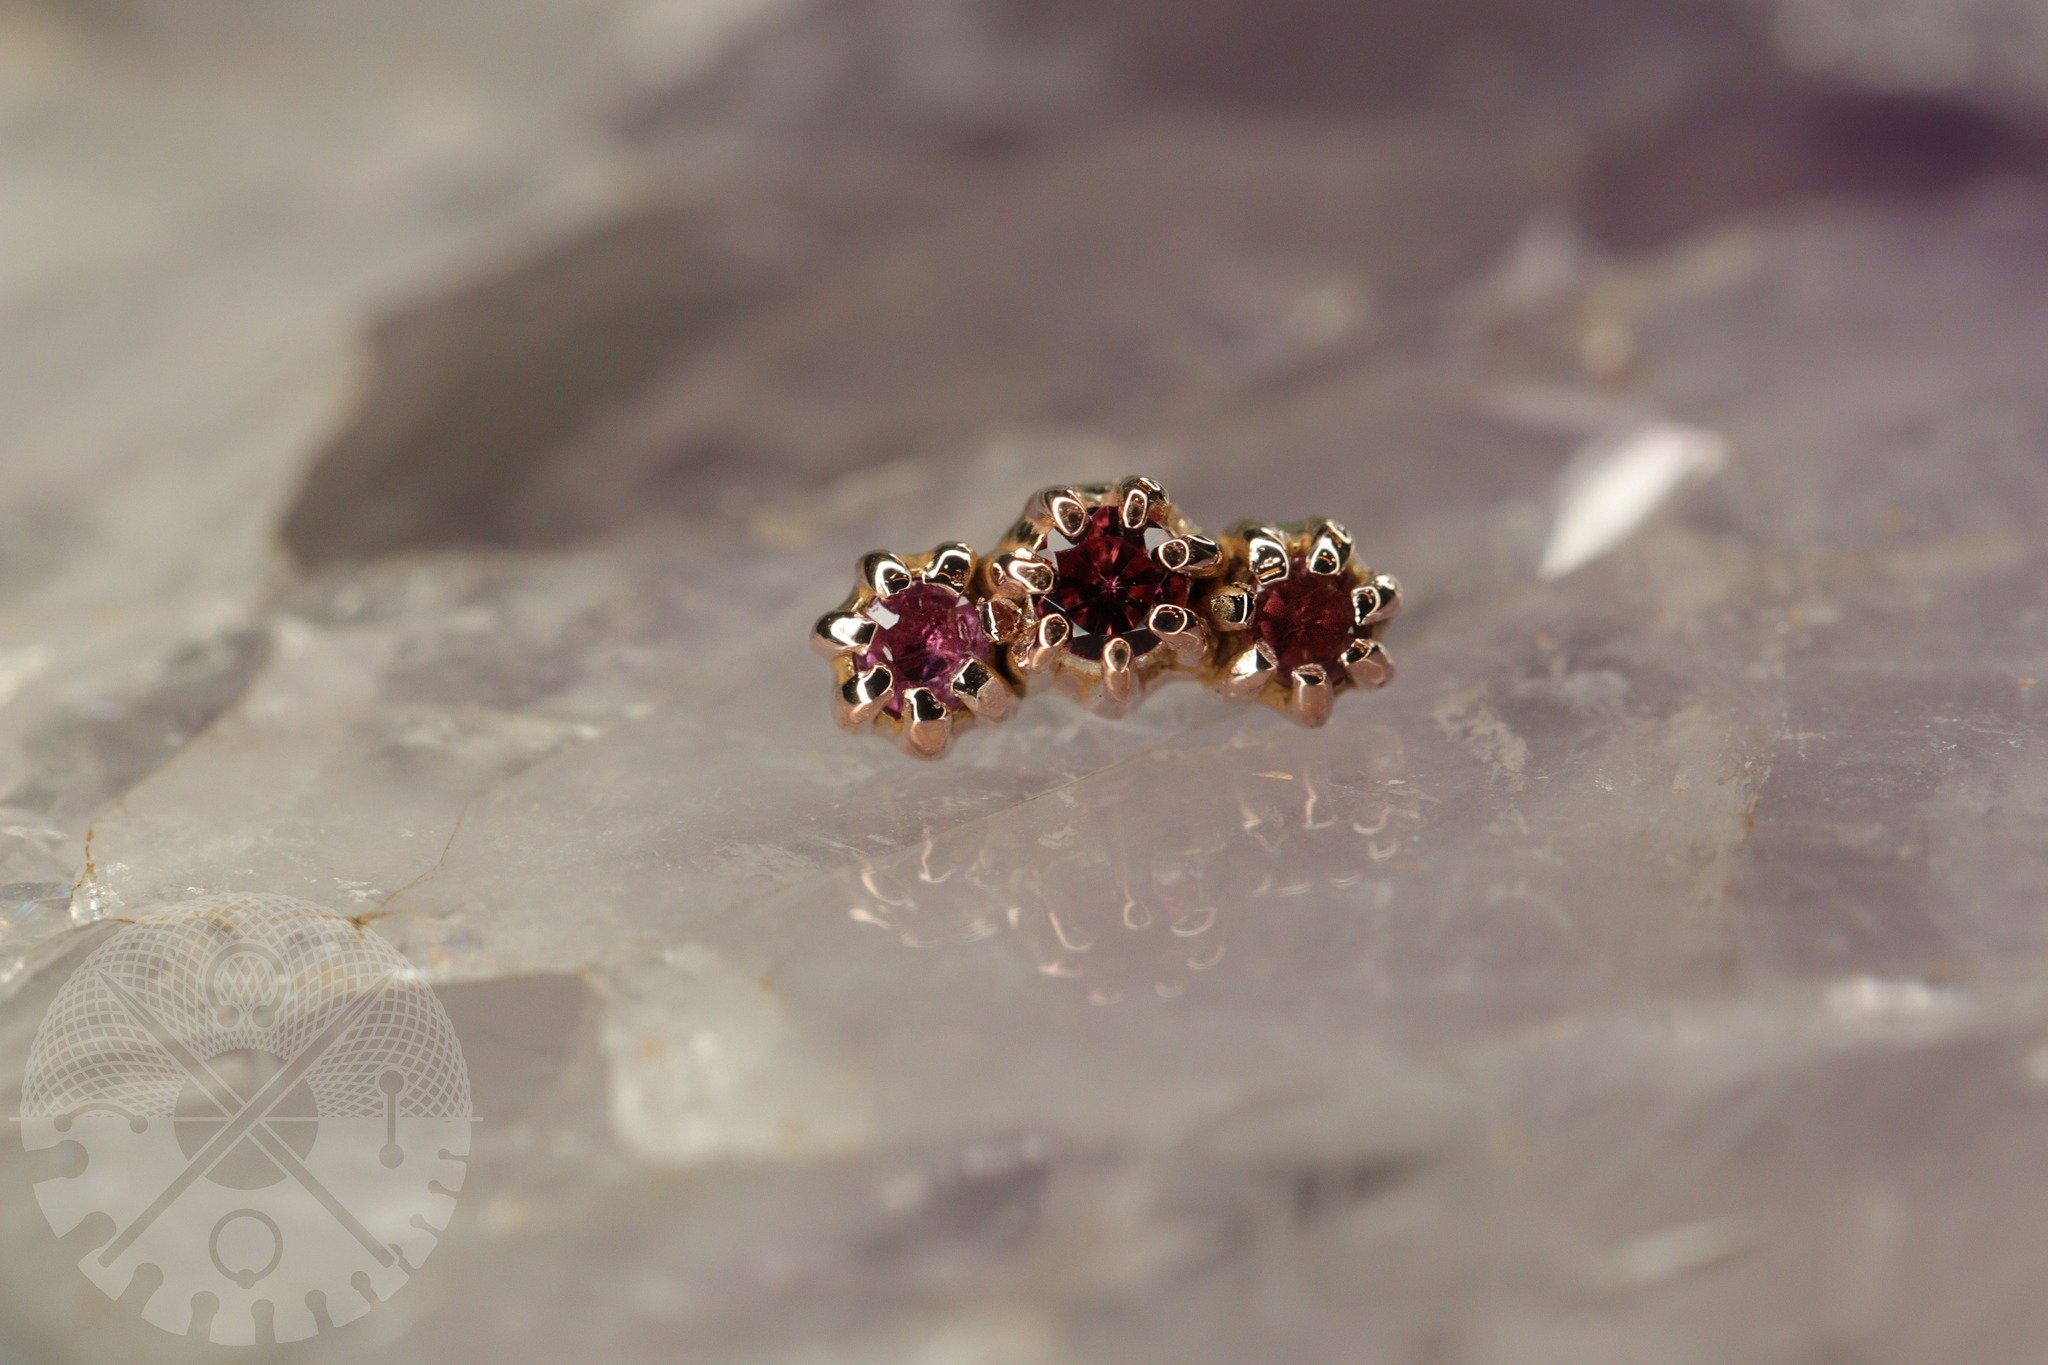 This file was saved as &quot;Juicy.jpeg&quot; in my computer because LOOK AT THOSE RUBIES. *drooling* @sacredsymbolsjewelry 

Good Life is appointment only for all services, consultations and even just to browse our jewelry selection. We are availabl